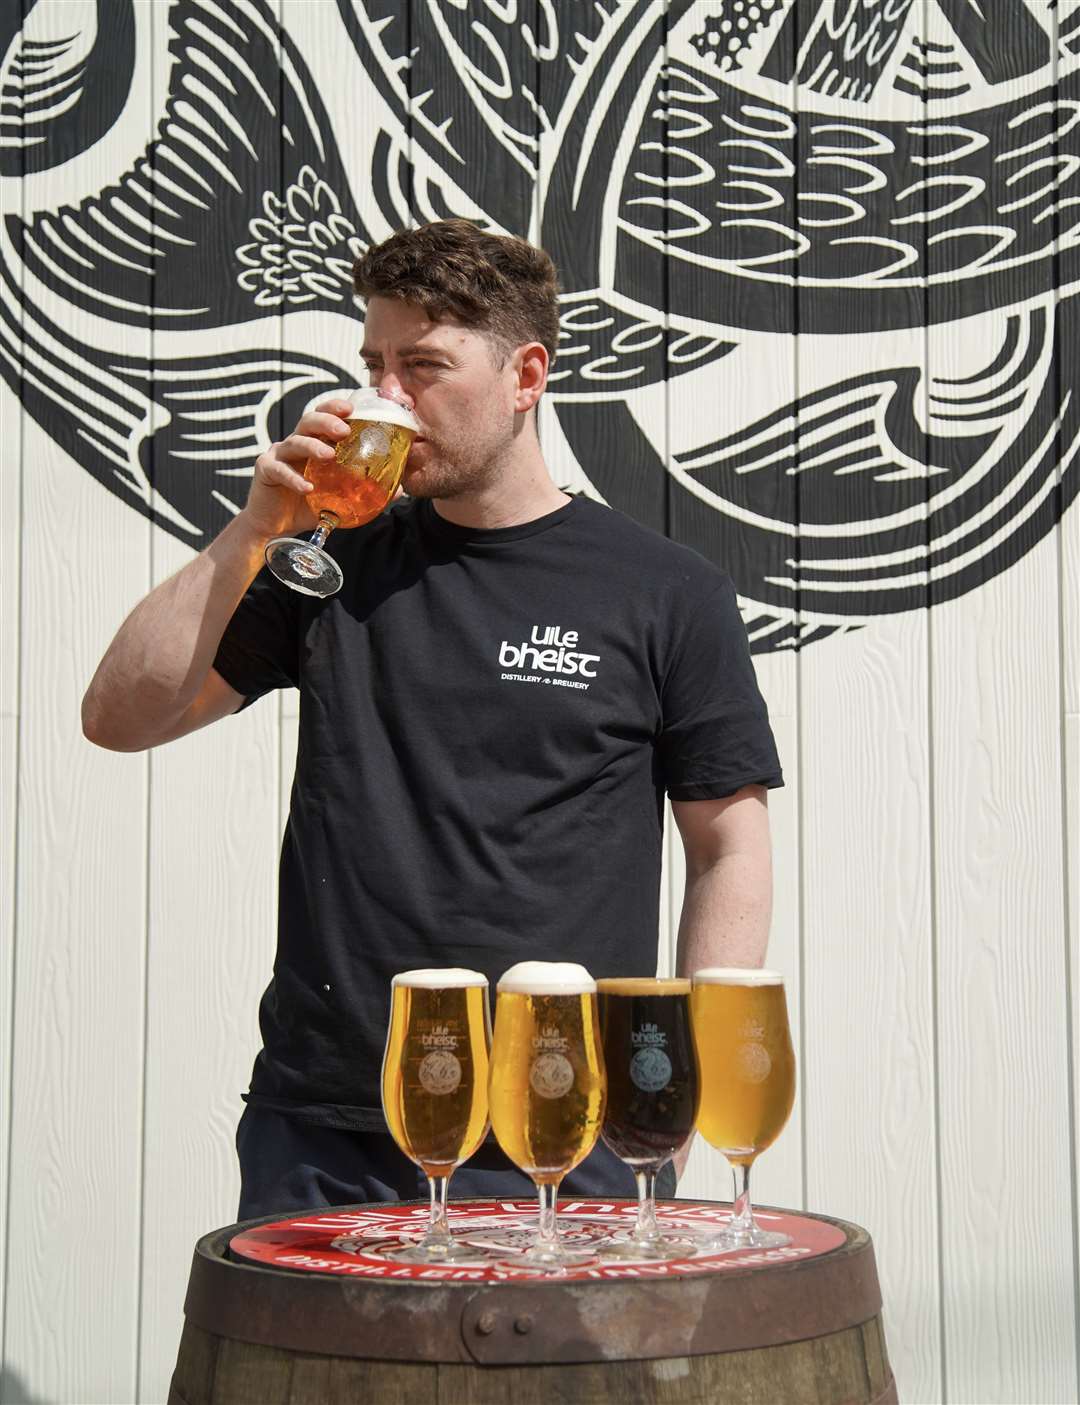 Uile-bheist head brewer Andrew Shearer samples one of the range. Picture: Uile-bheist